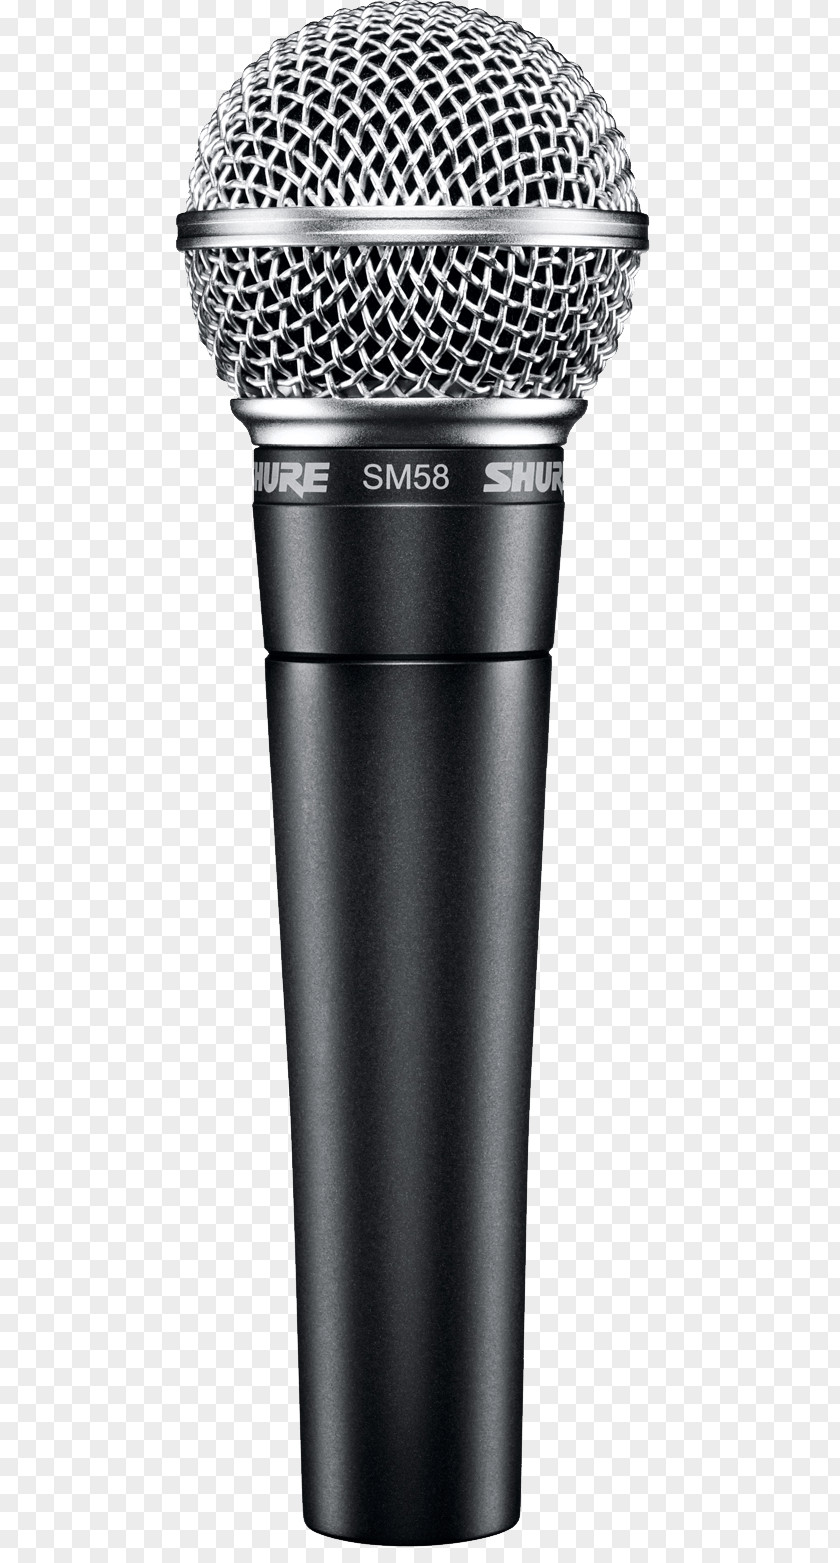 Microphone Image Shure SM58 Human Voice XLR Connector PNG